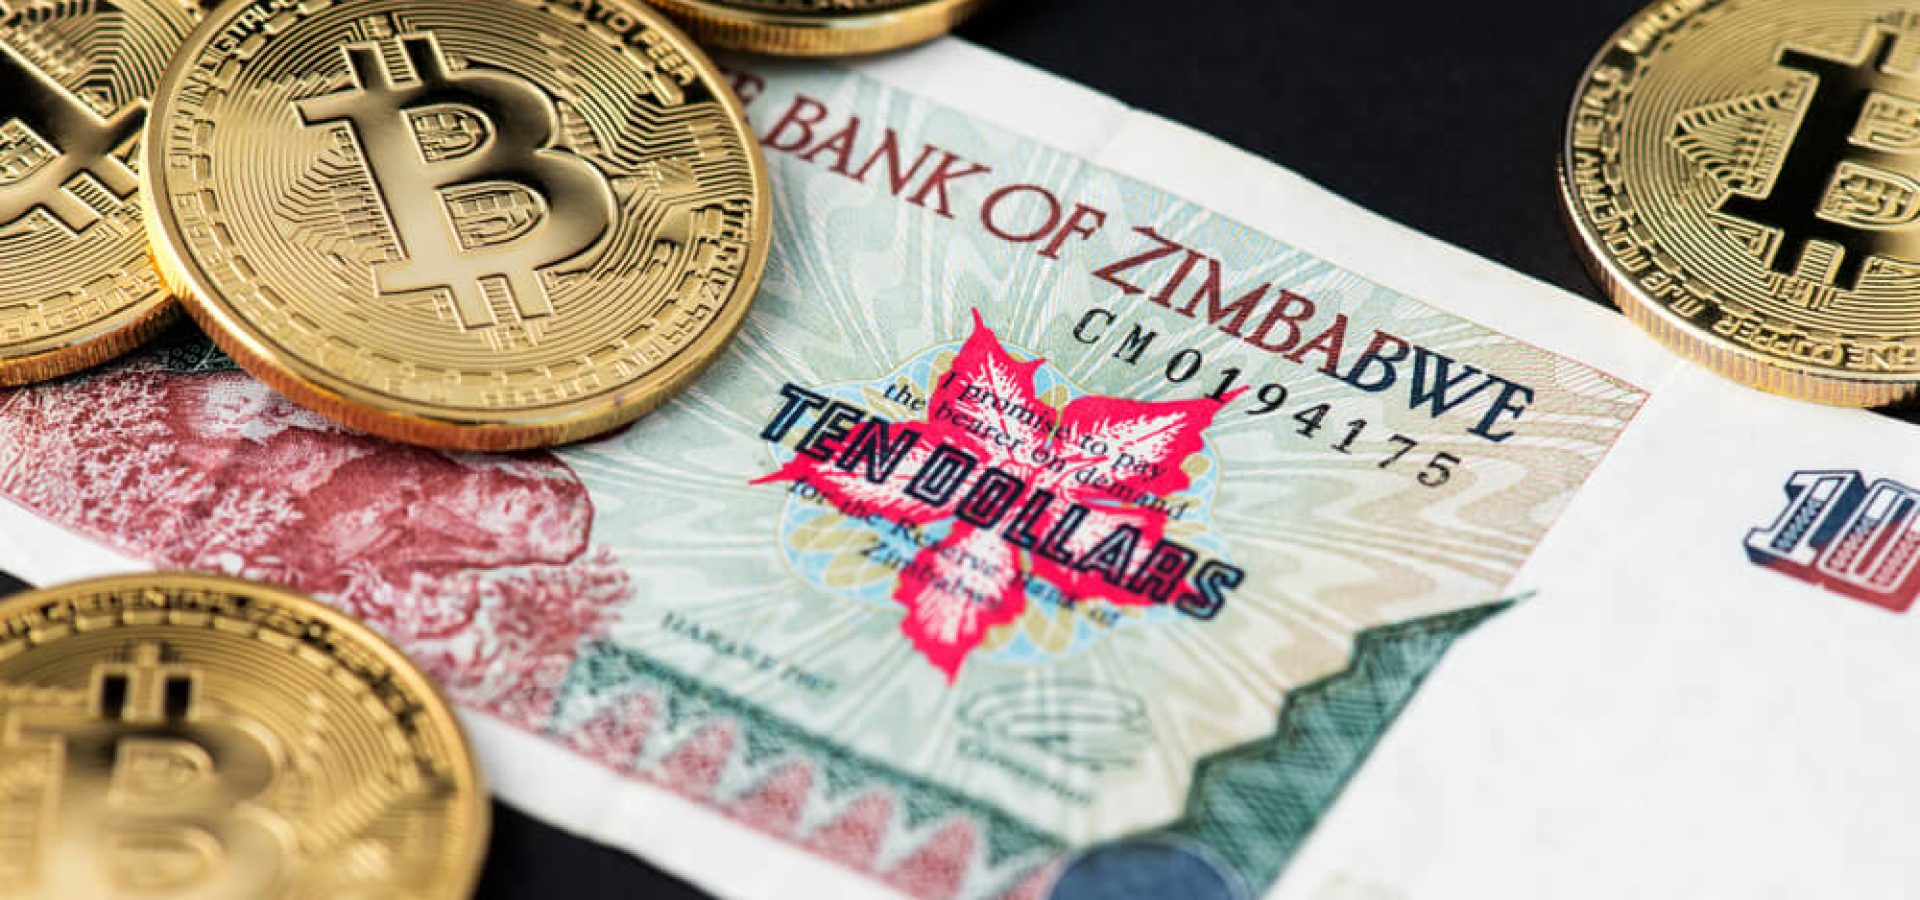 Digital Coins: Bitcoin on Zimbabwe hyperinflation banknote close up.